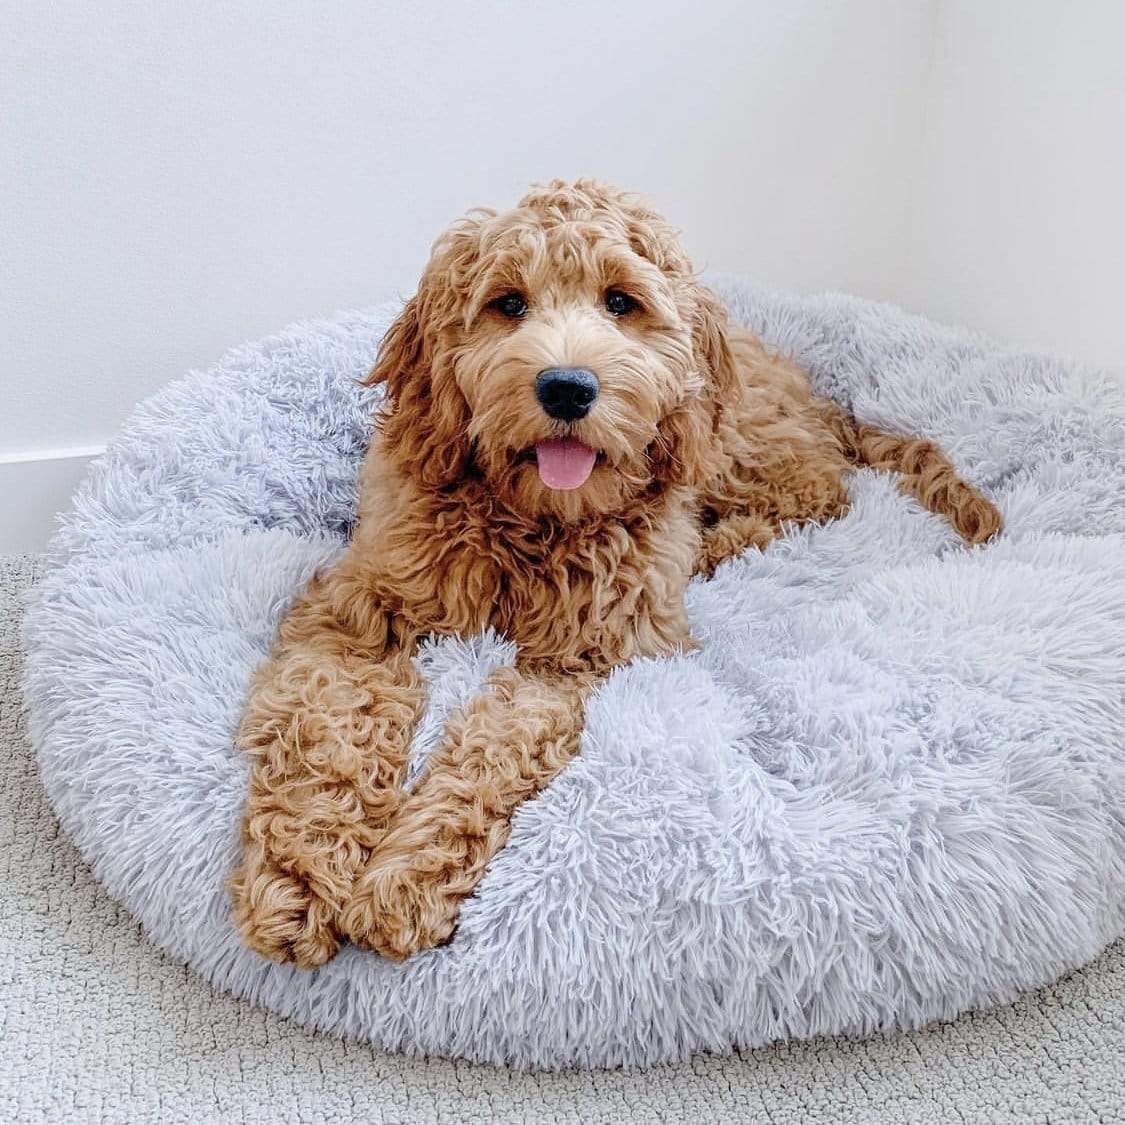 Anti-Anxiety Calming Bed for Dogs Comfy Fur Donut Cuddler Cozy Pet Bed